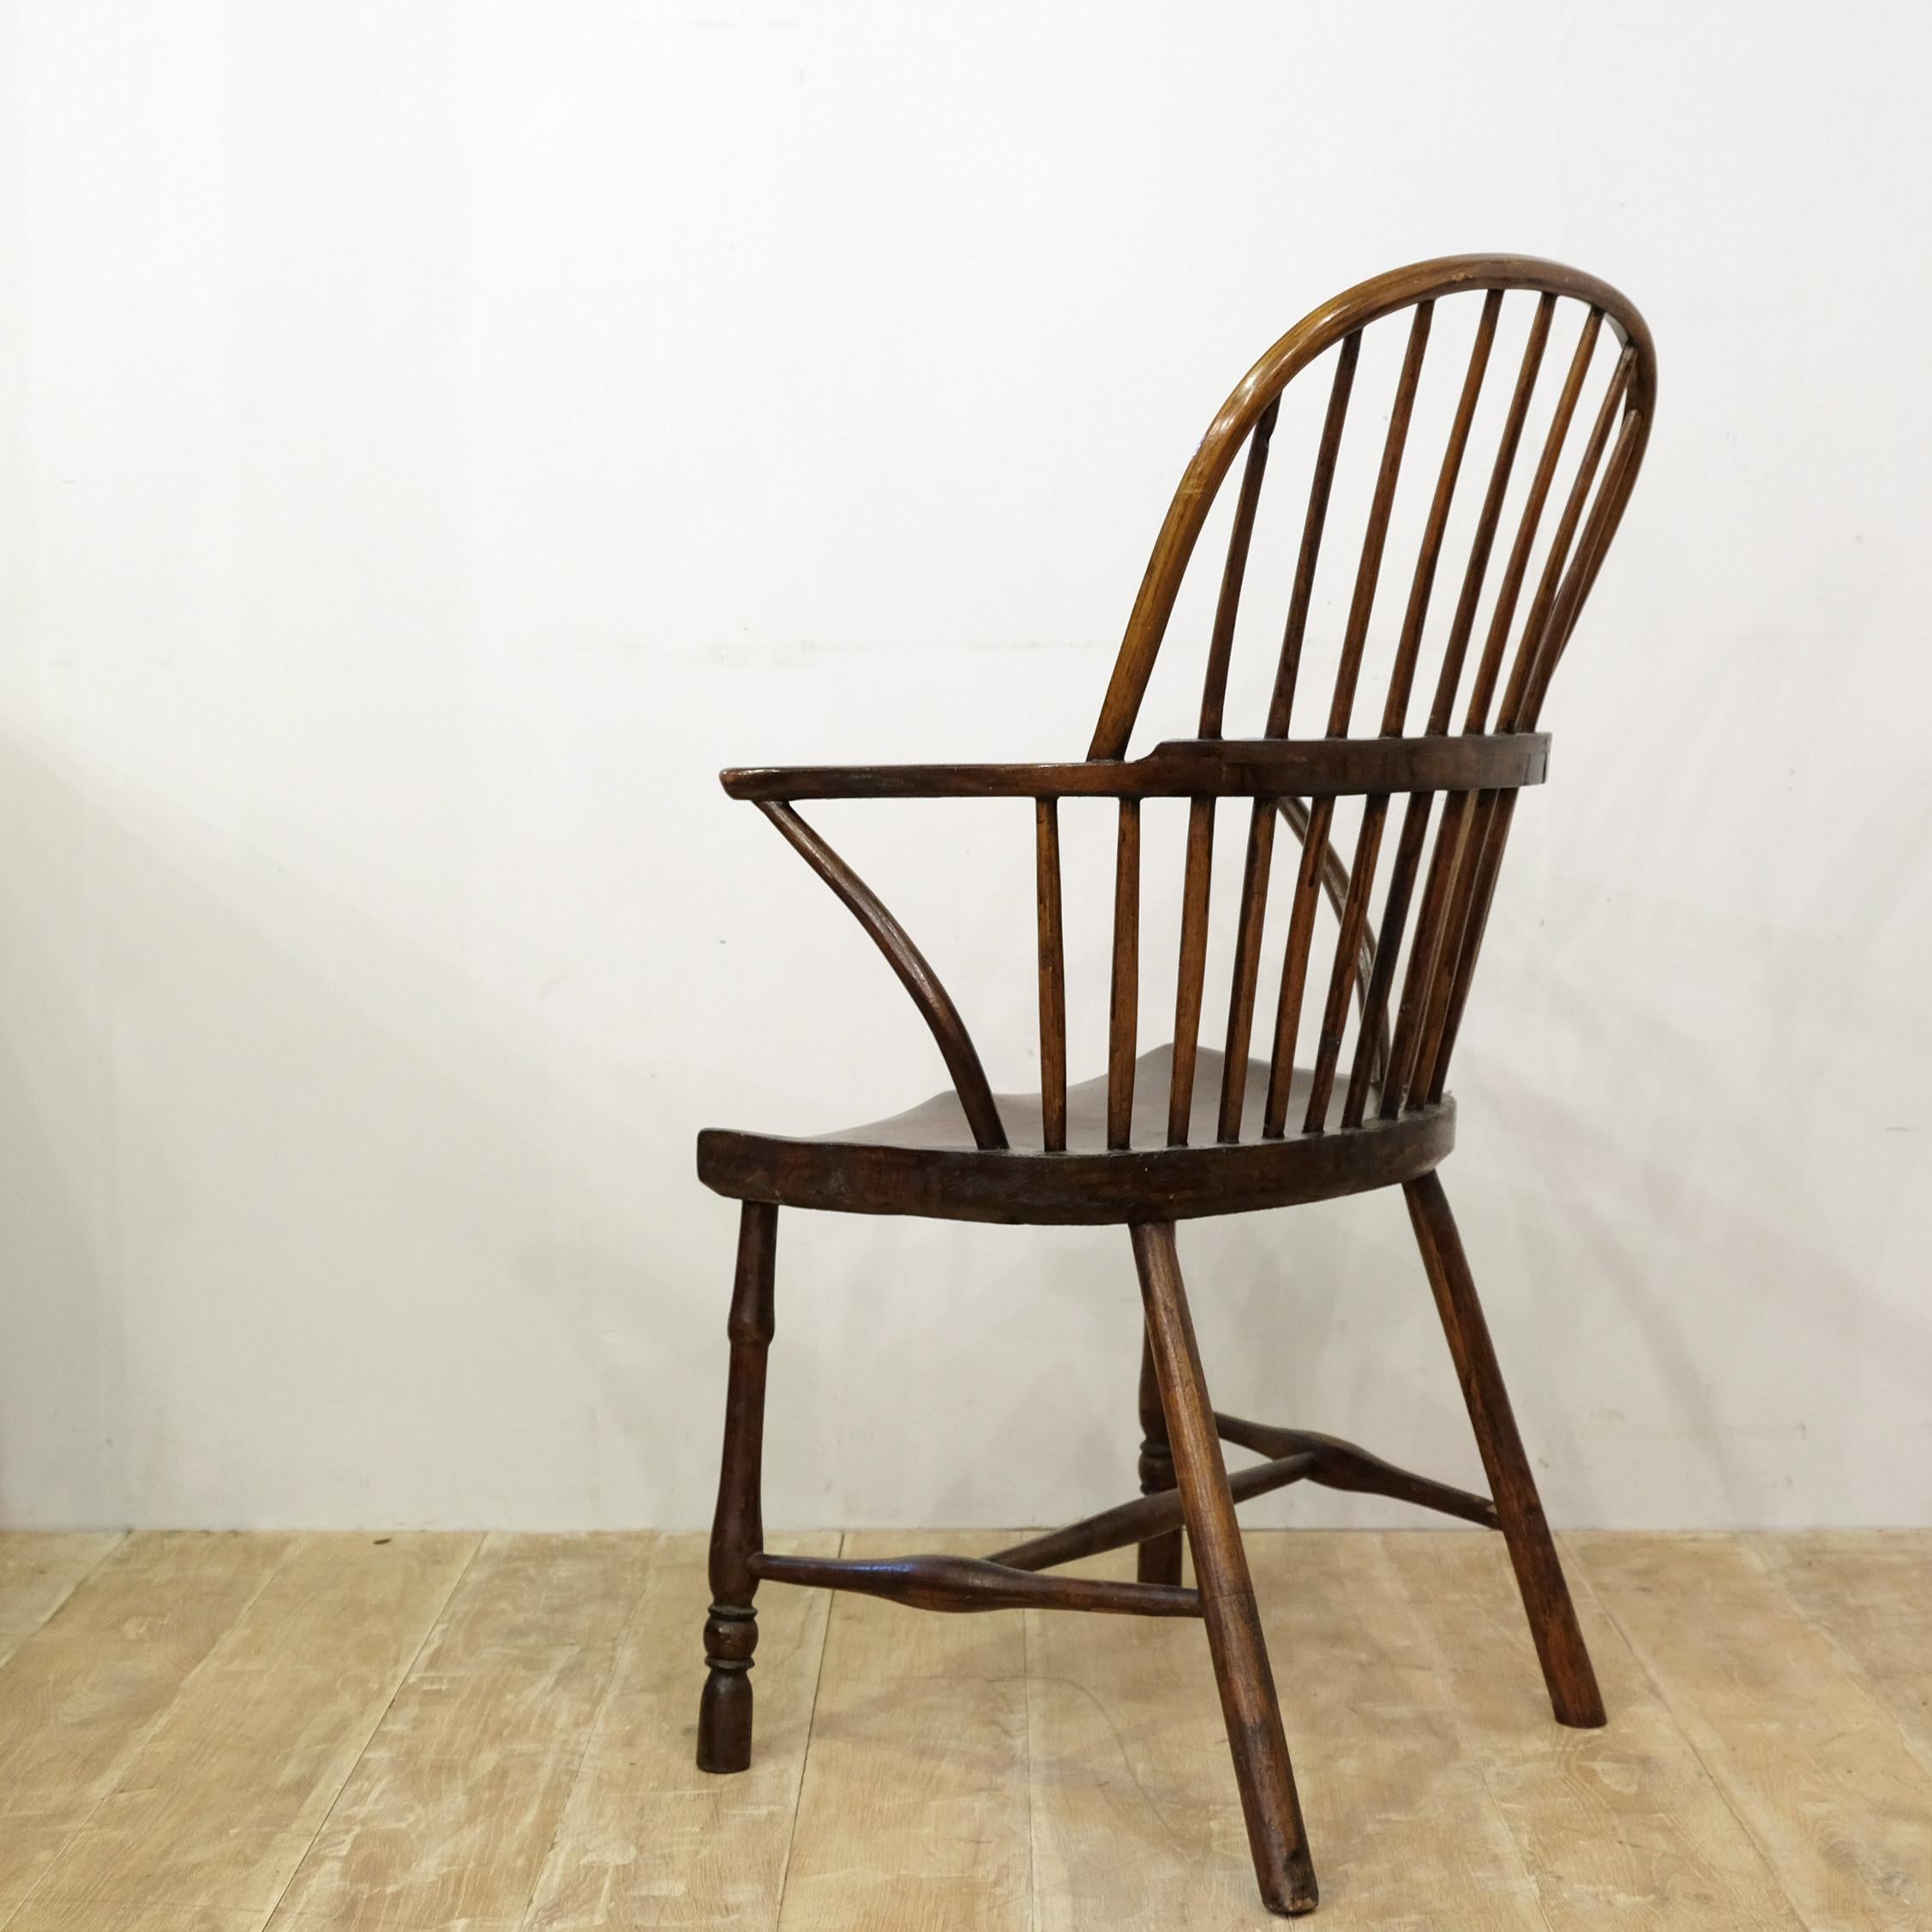 Hand-Crafted English West Country Mid-19th Century Stickback Windsor Chair